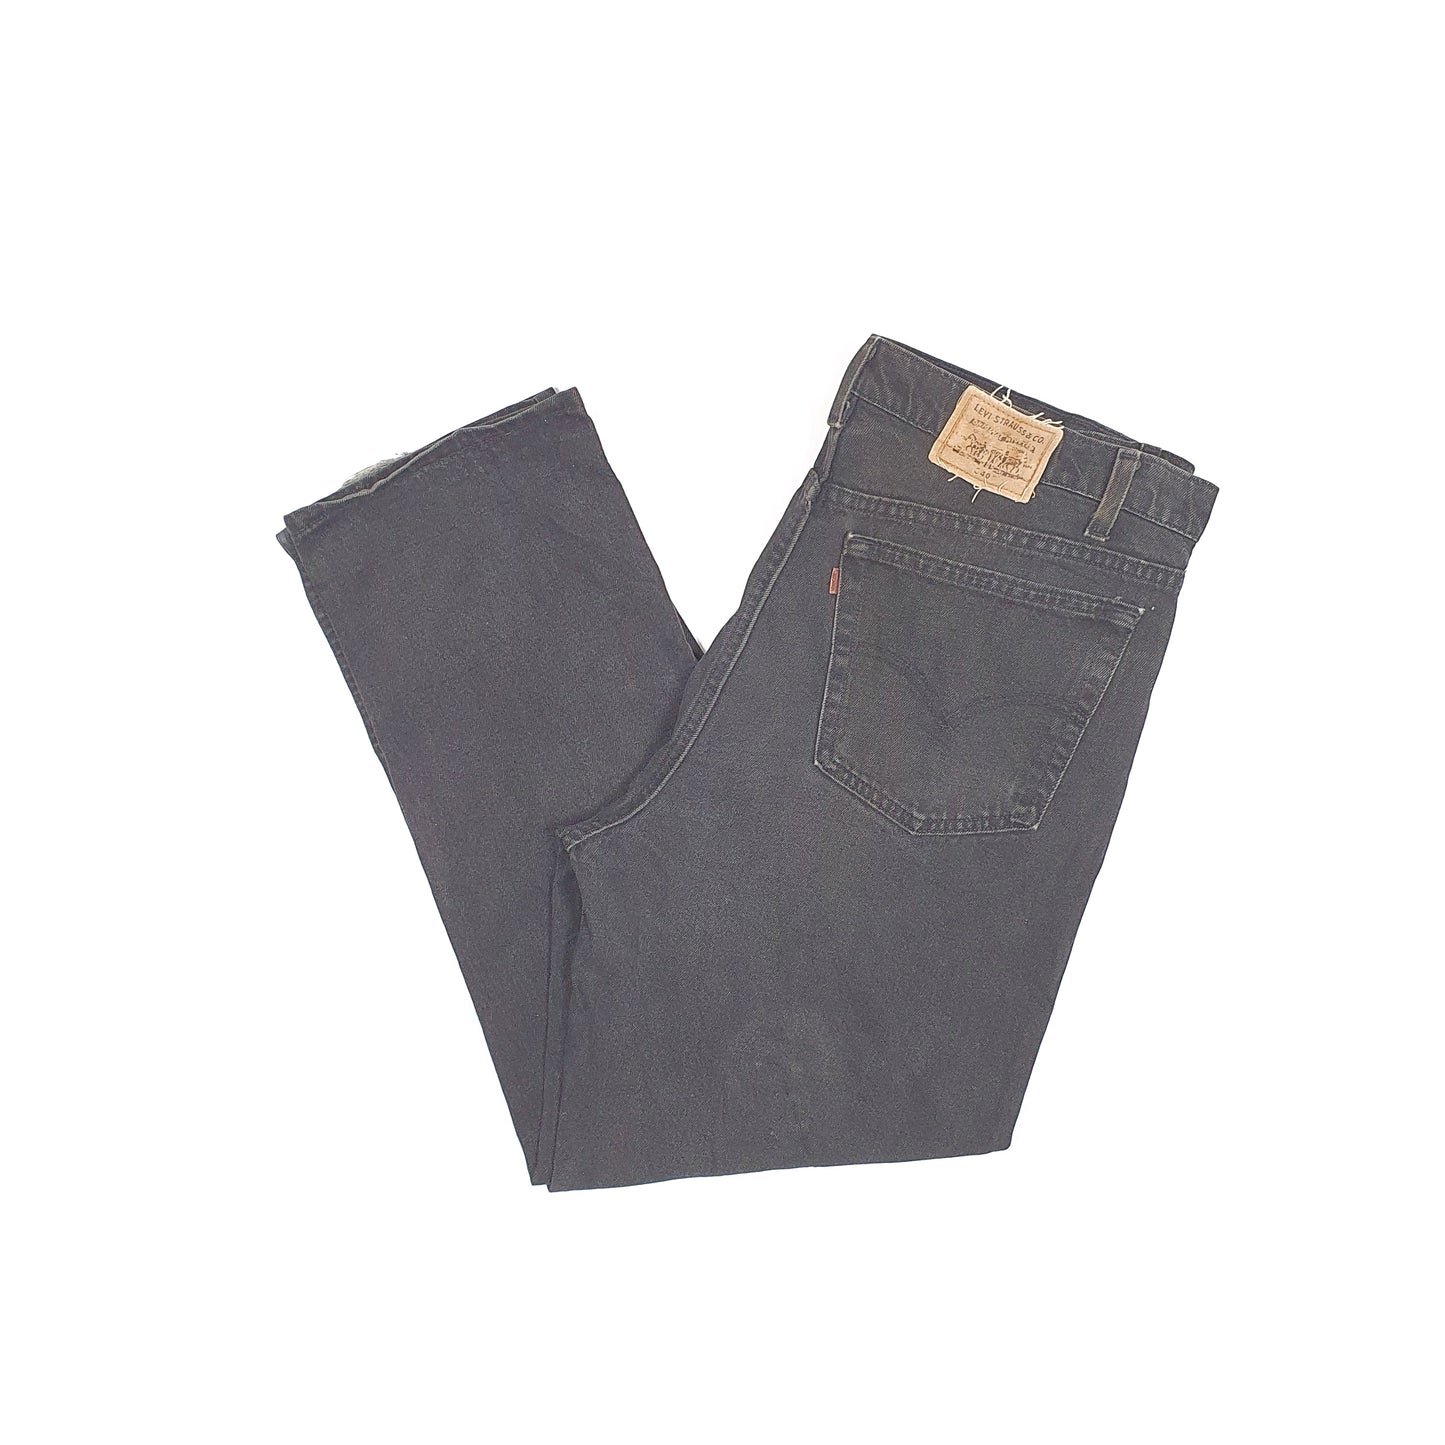 Levis 540 Regular Fit Relaxed Jeans W40 L29 Black